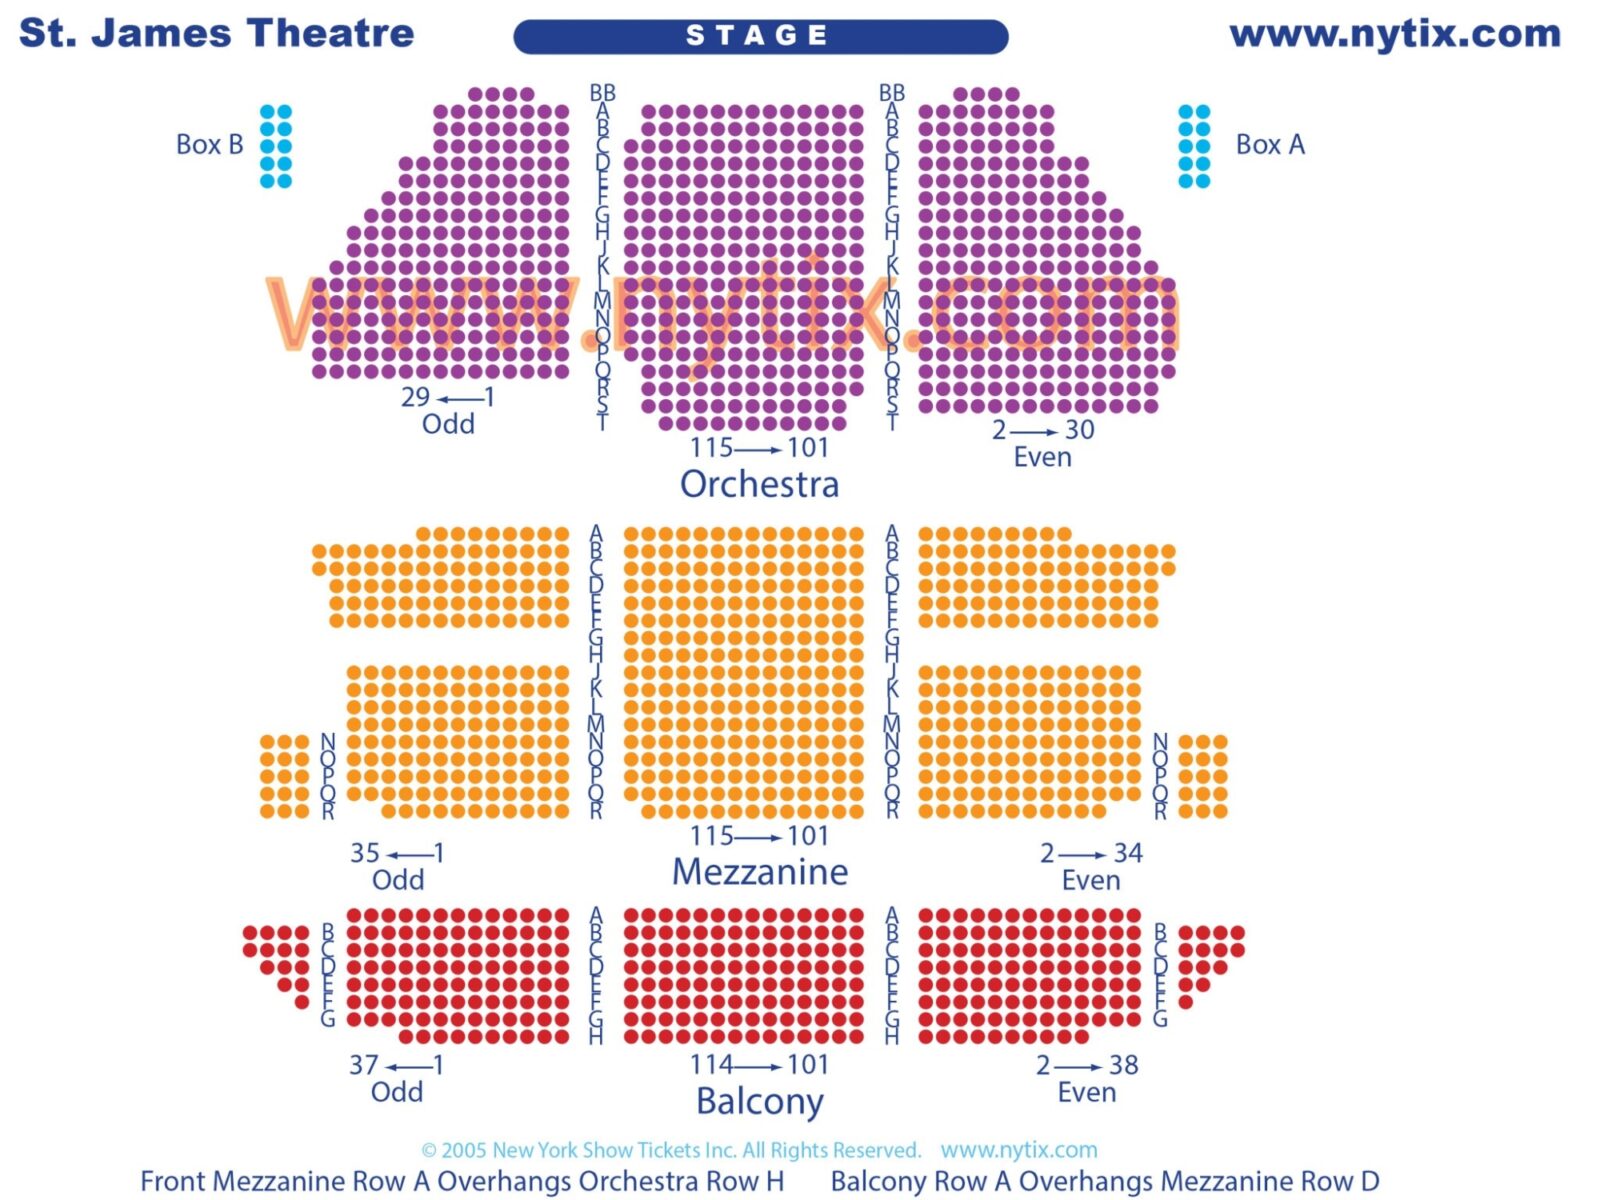 Frozen Broadway Theater Seating Chart